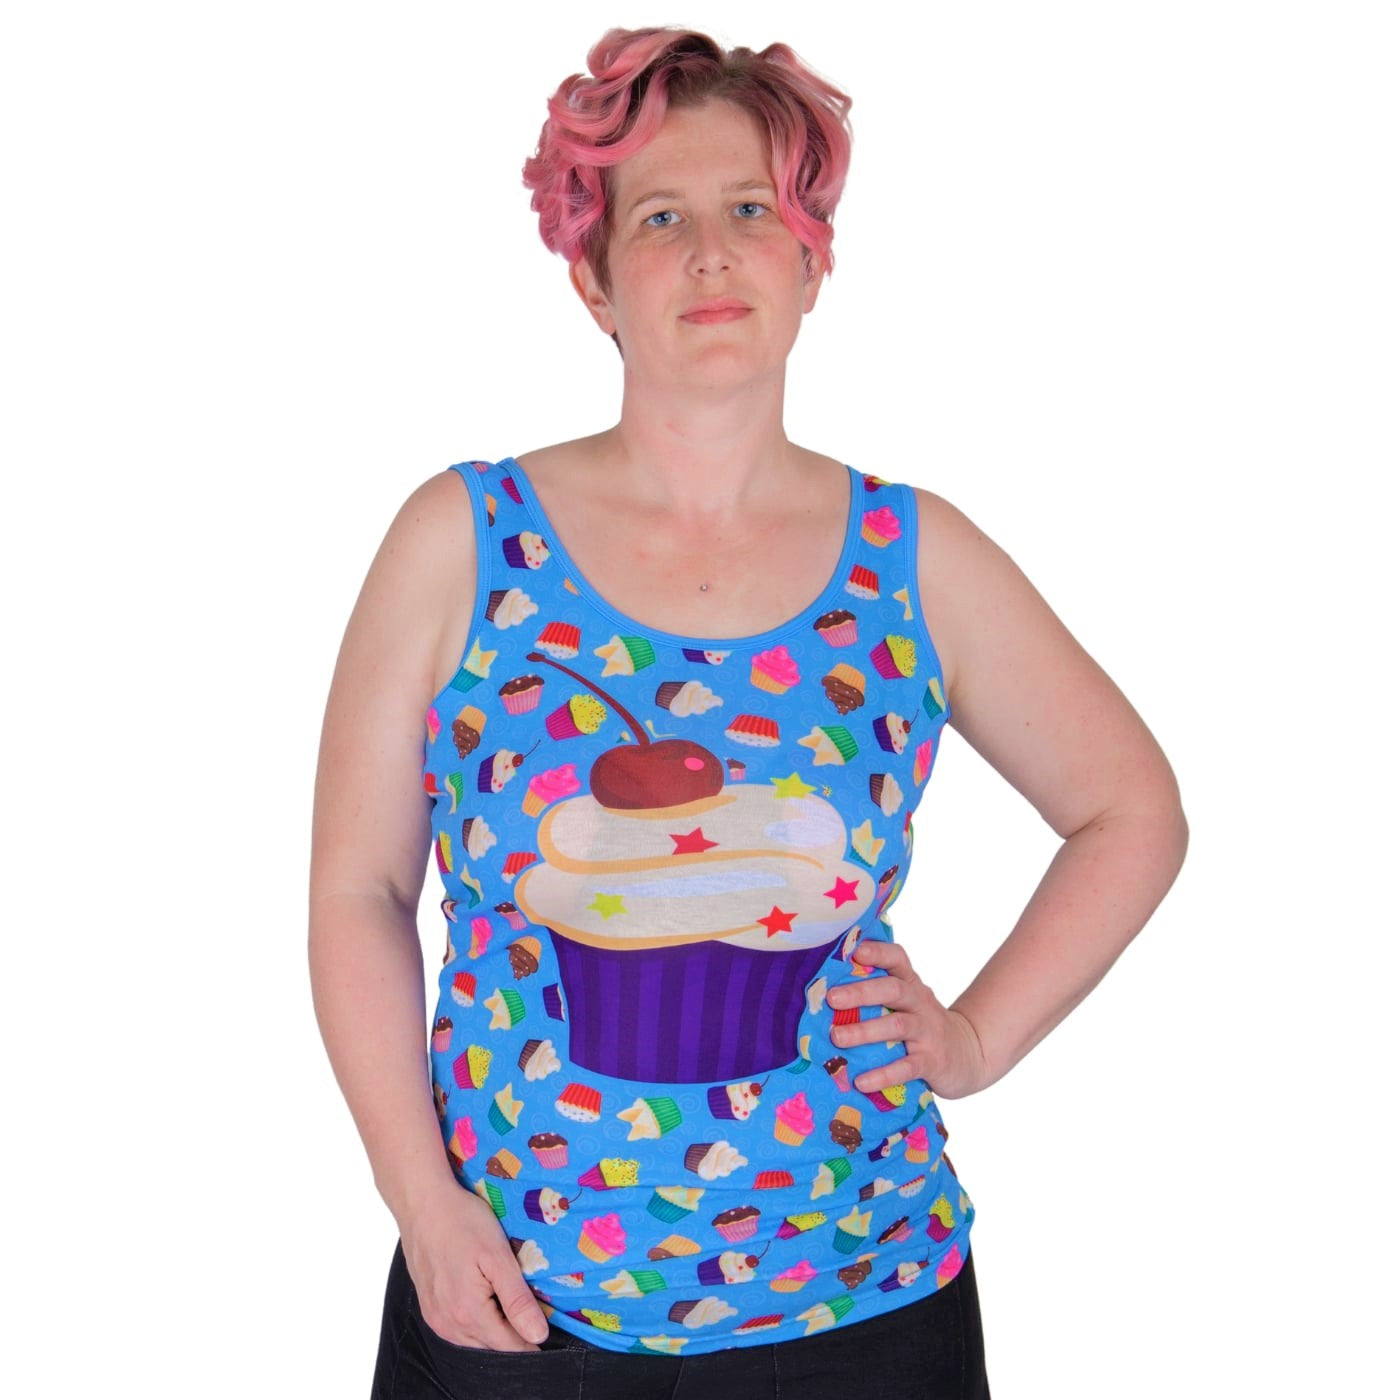 Patty Cakes Singlet Top by RainbowsAndFairies.com.au (Cupcakes - Cake - Kitsch - Vintage Inspired - Tank Top - Singlet Top - Party Food - Foodie - High Tea) - SKU: CL_SGLET_PATTY_ORG - Pic-04